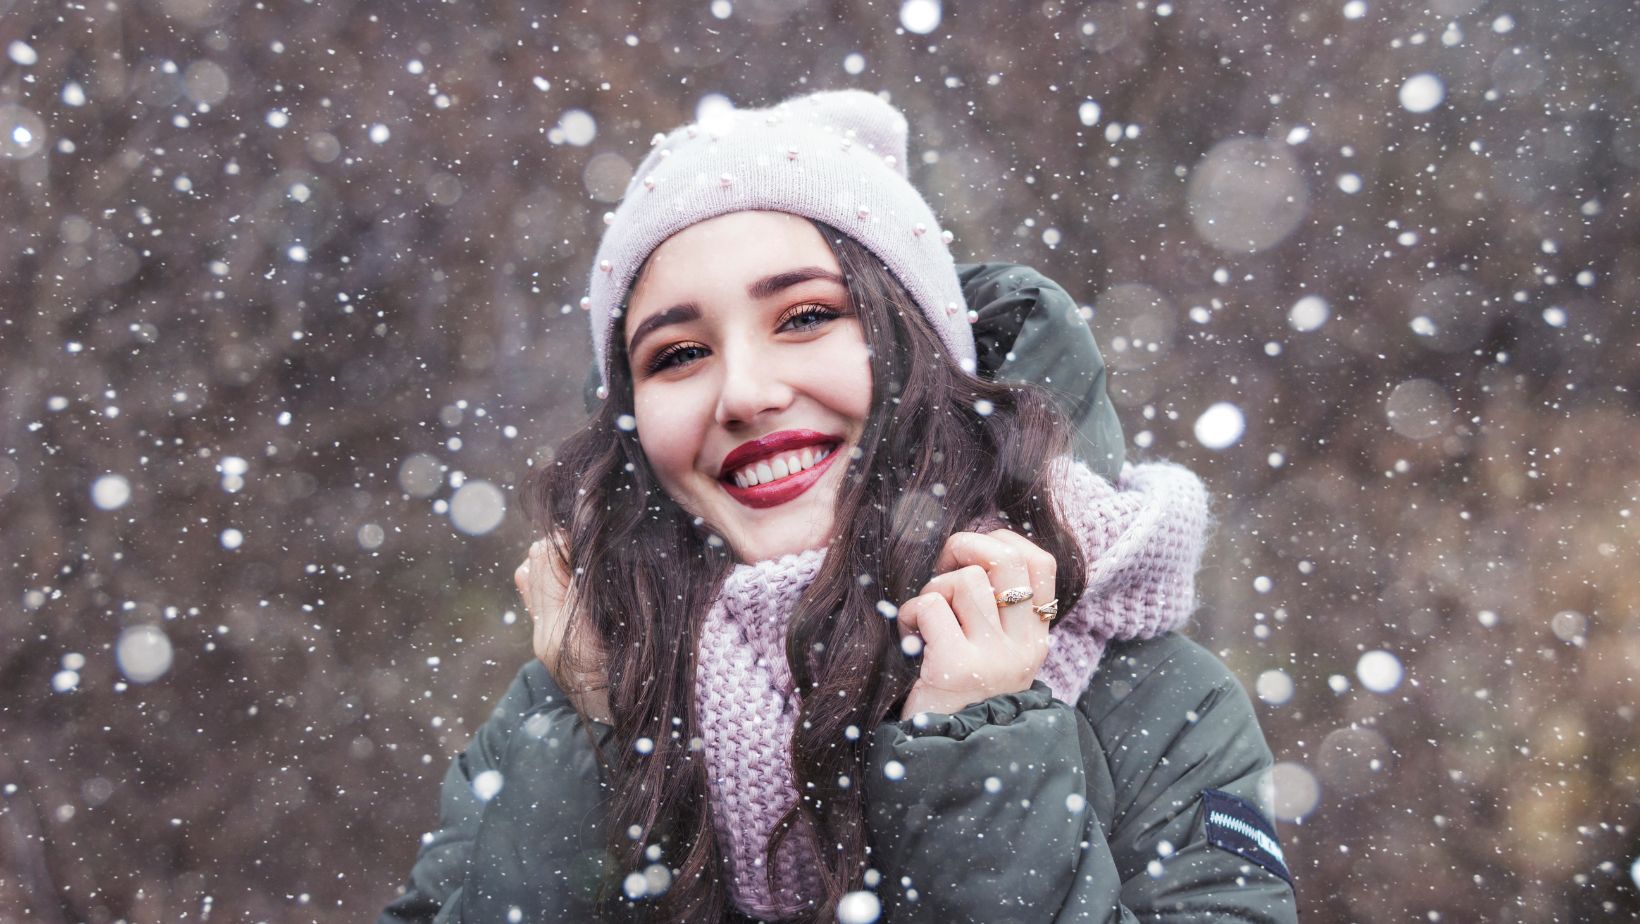 The Do’s and Don’ts of Winterproofing Your Hair